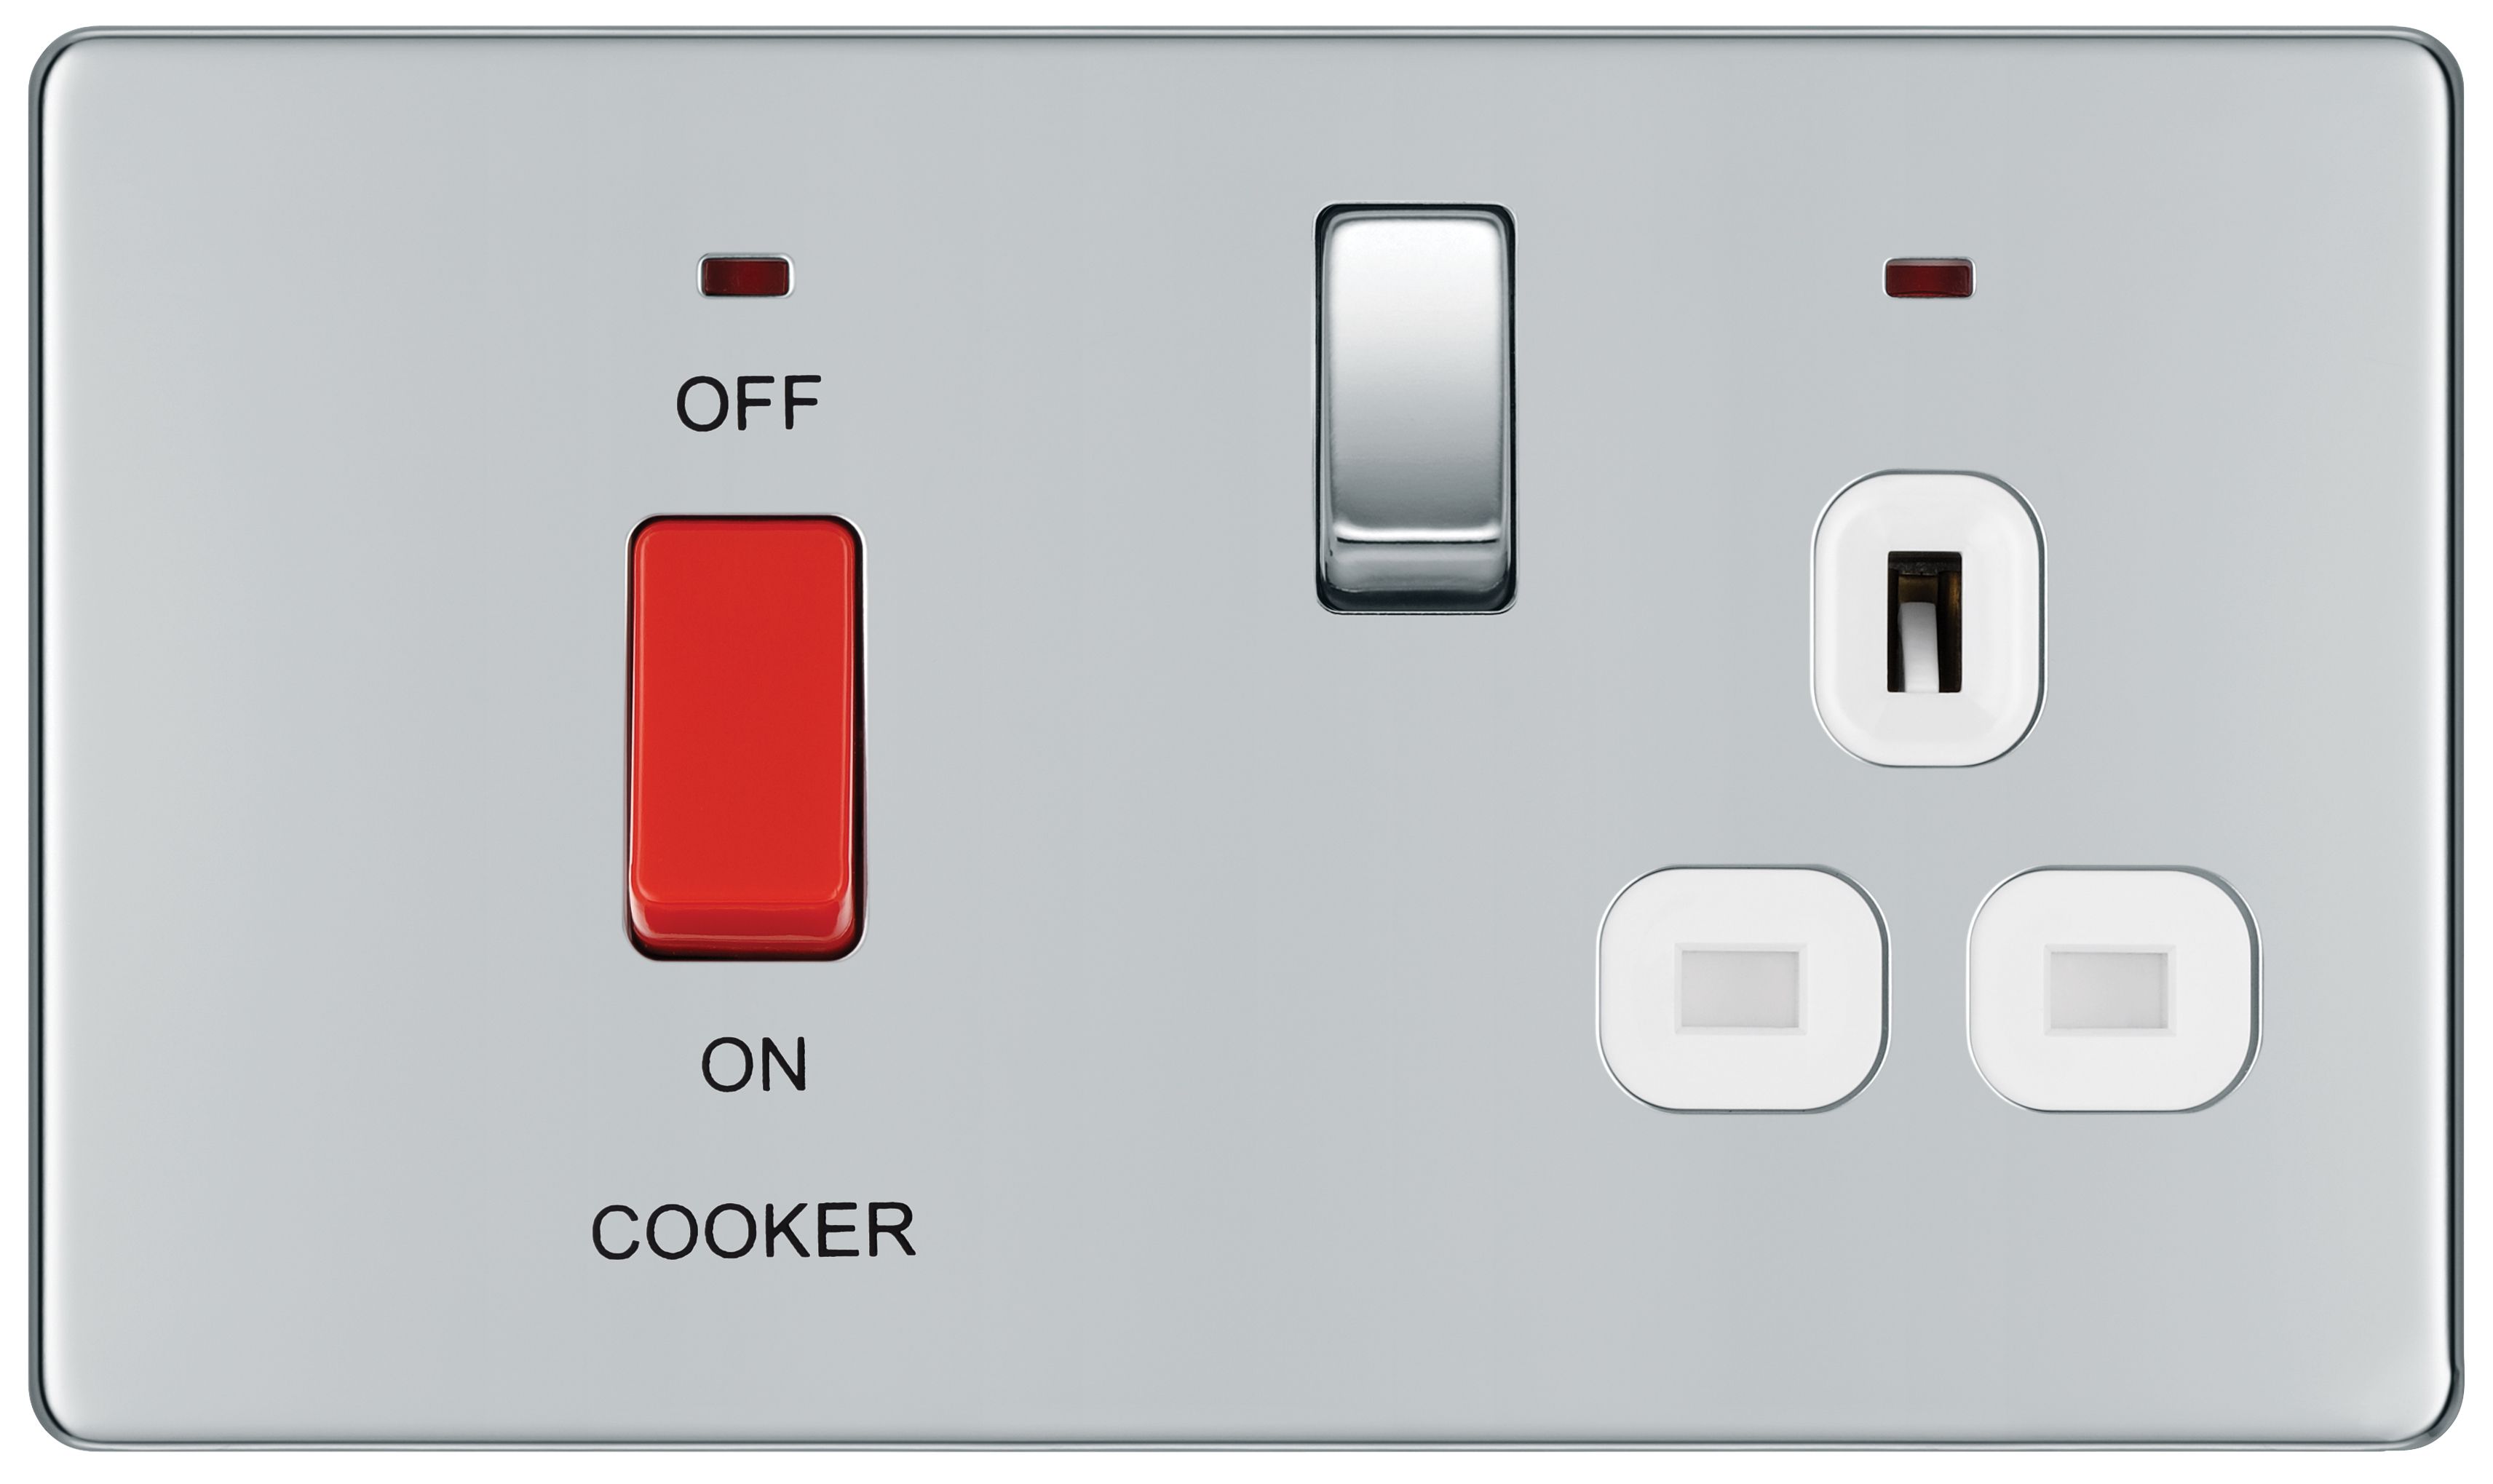 BG 45 Amp Screwless Flat Plate Cooker Control Unit with Switched 13 Amp Power Socket Includes Power Indicators - Polished Chrome